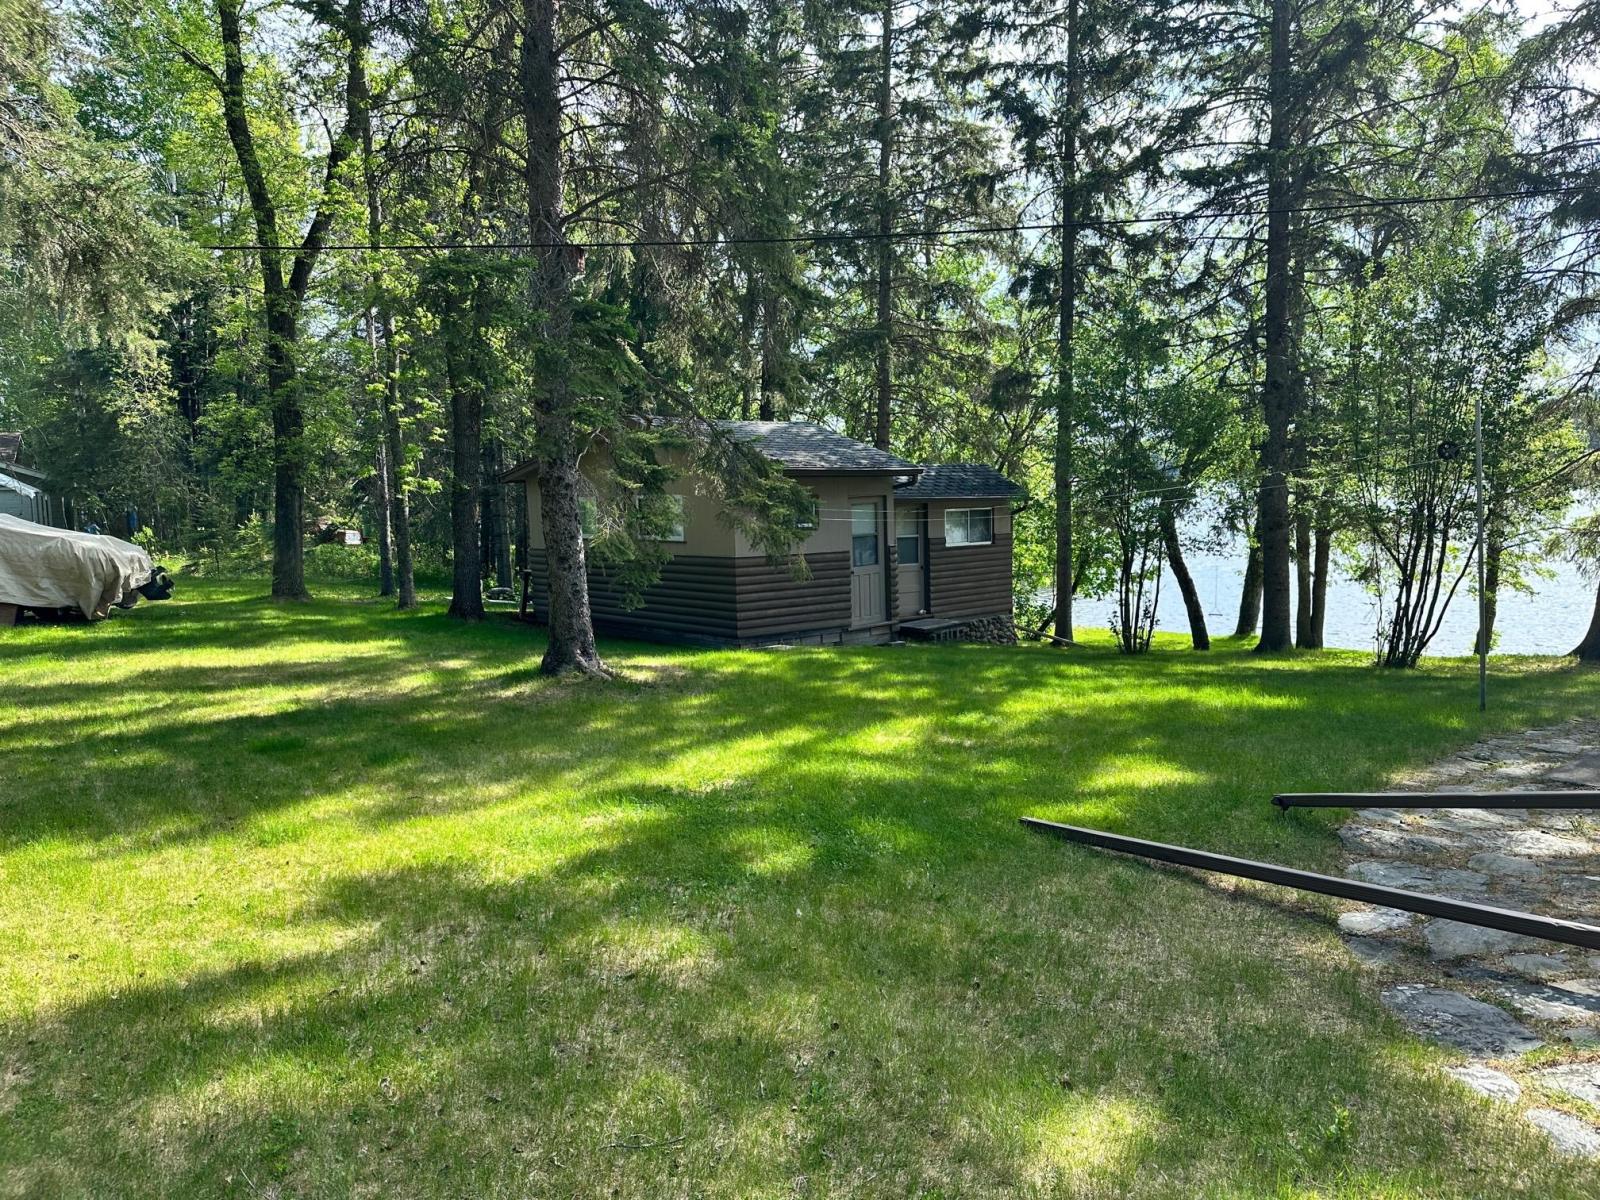 Falcon Lakefront Cottage for Sale - South Shore 150 Ft Frontage